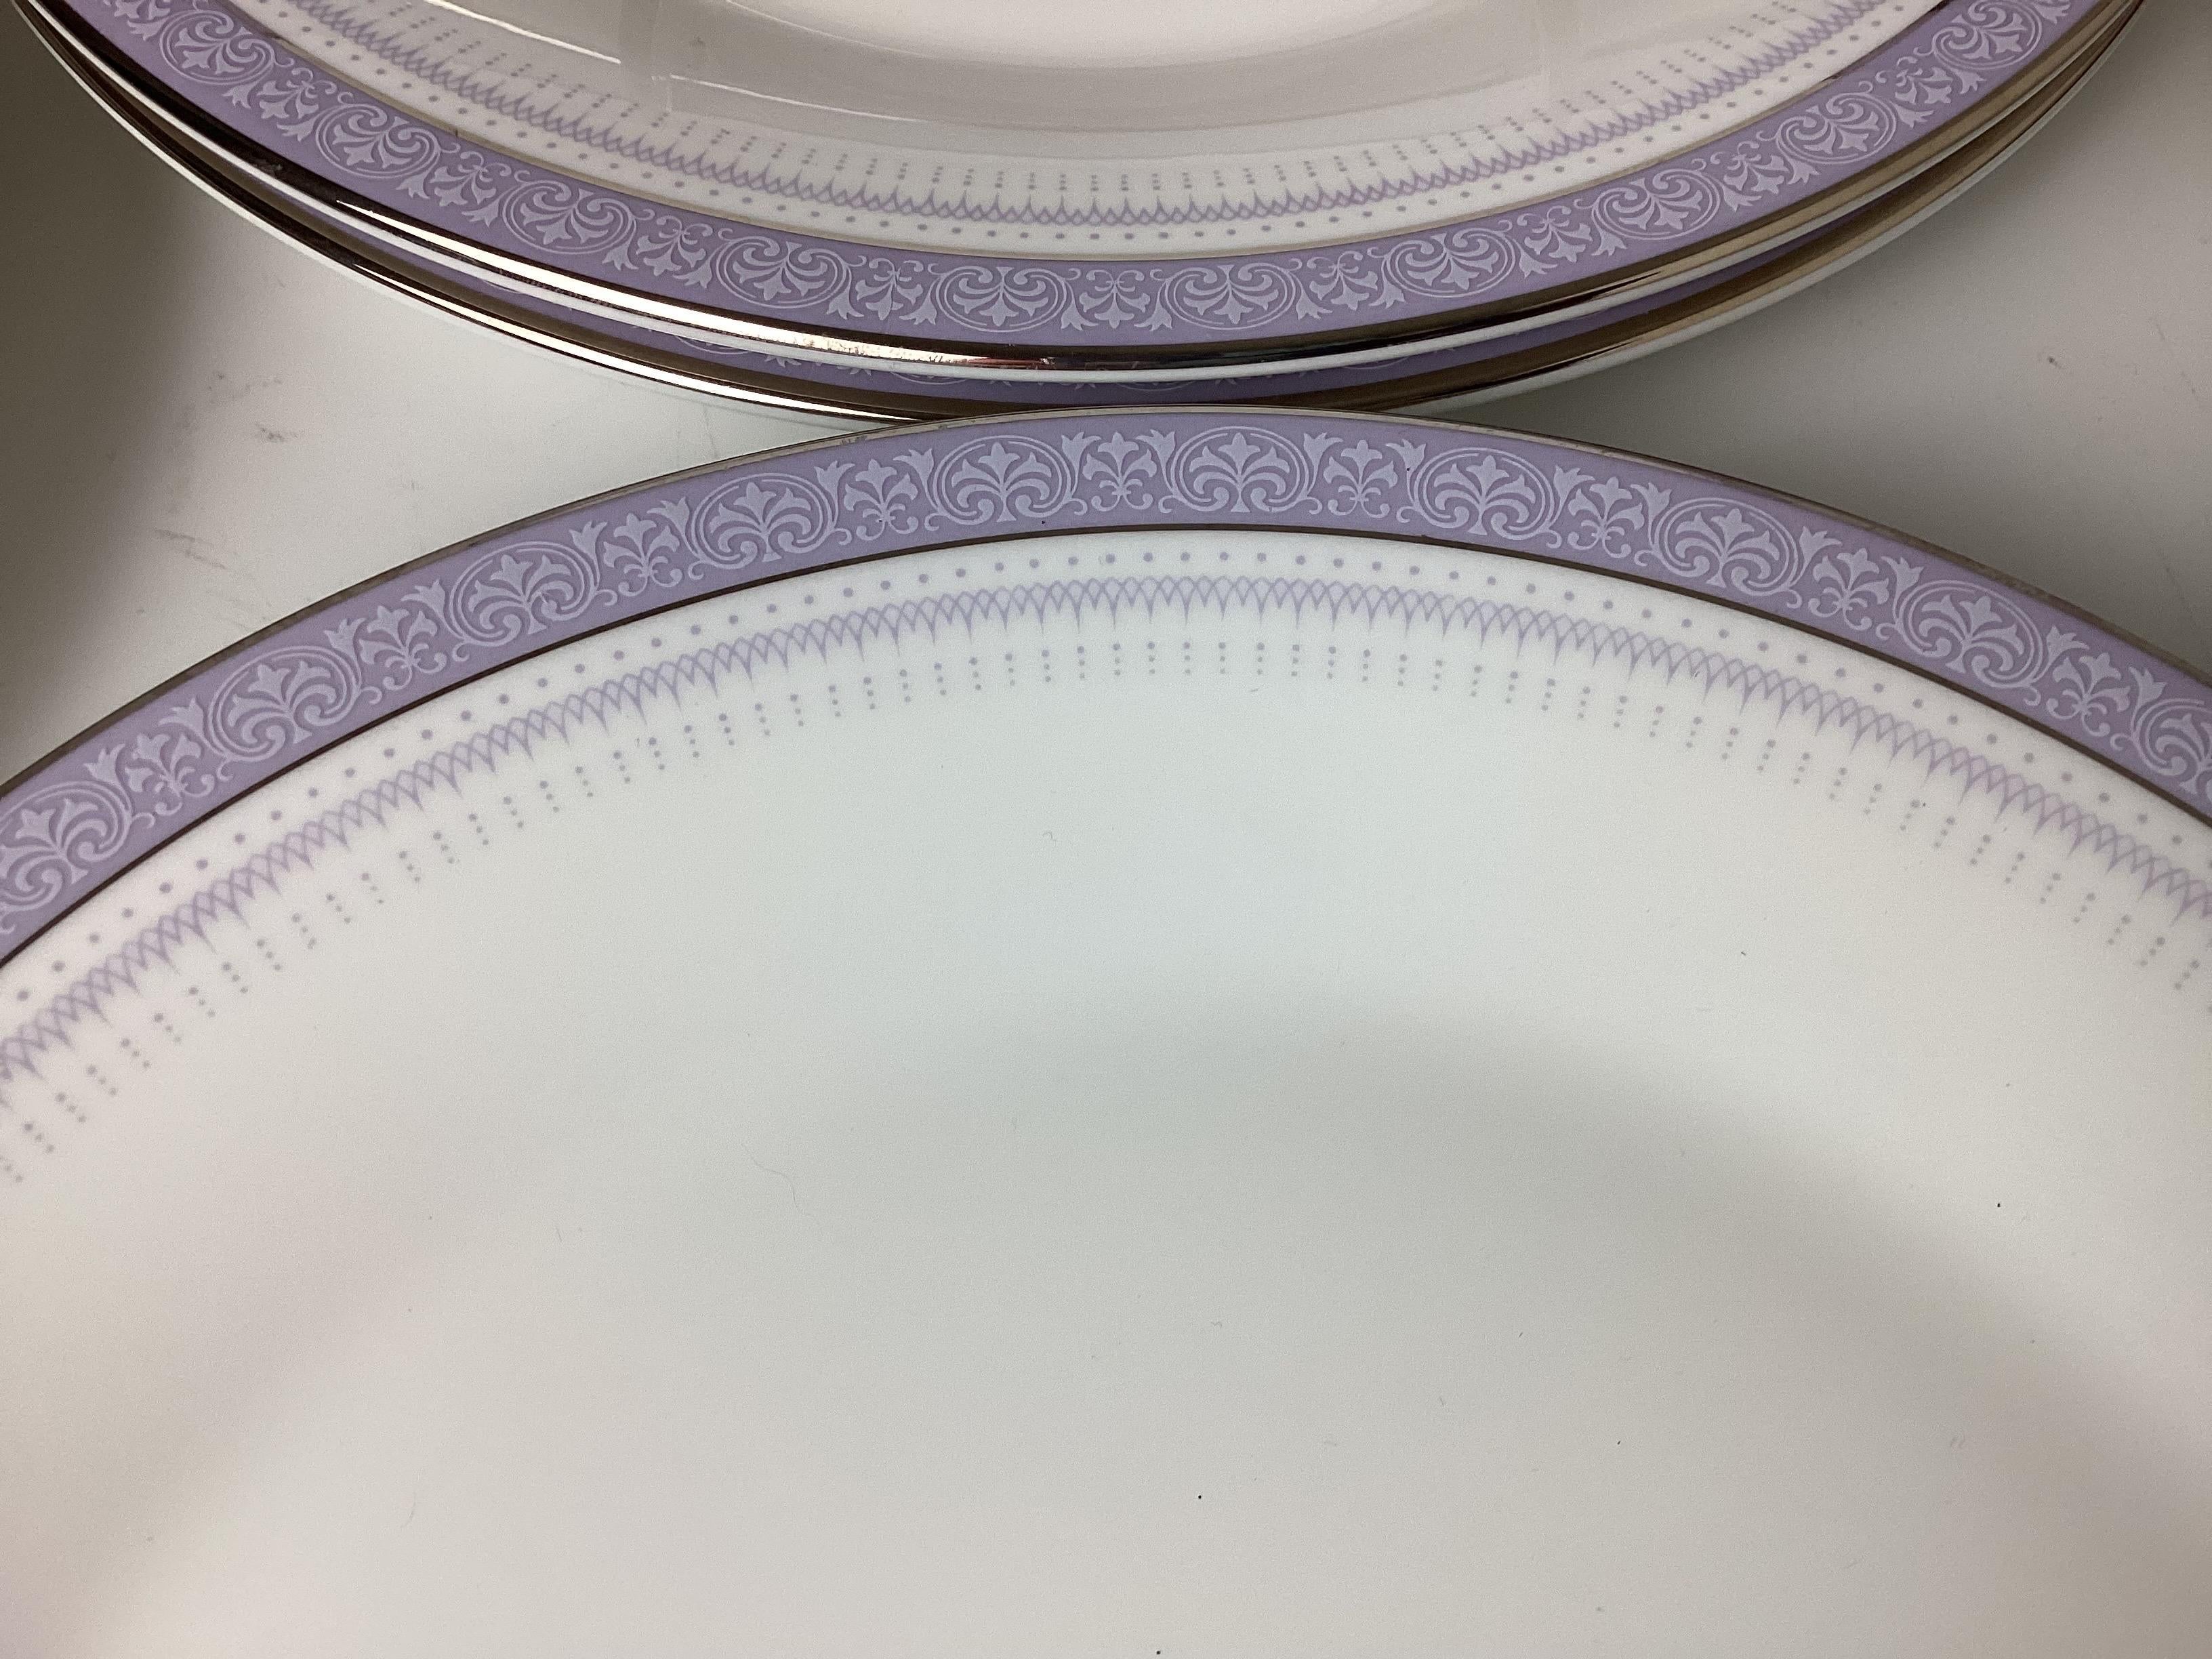 Set of 8 Plus One Lilactime by Royal Doulton Dinner Service Plates In Excellent Condition For Sale In Lambertville, NJ